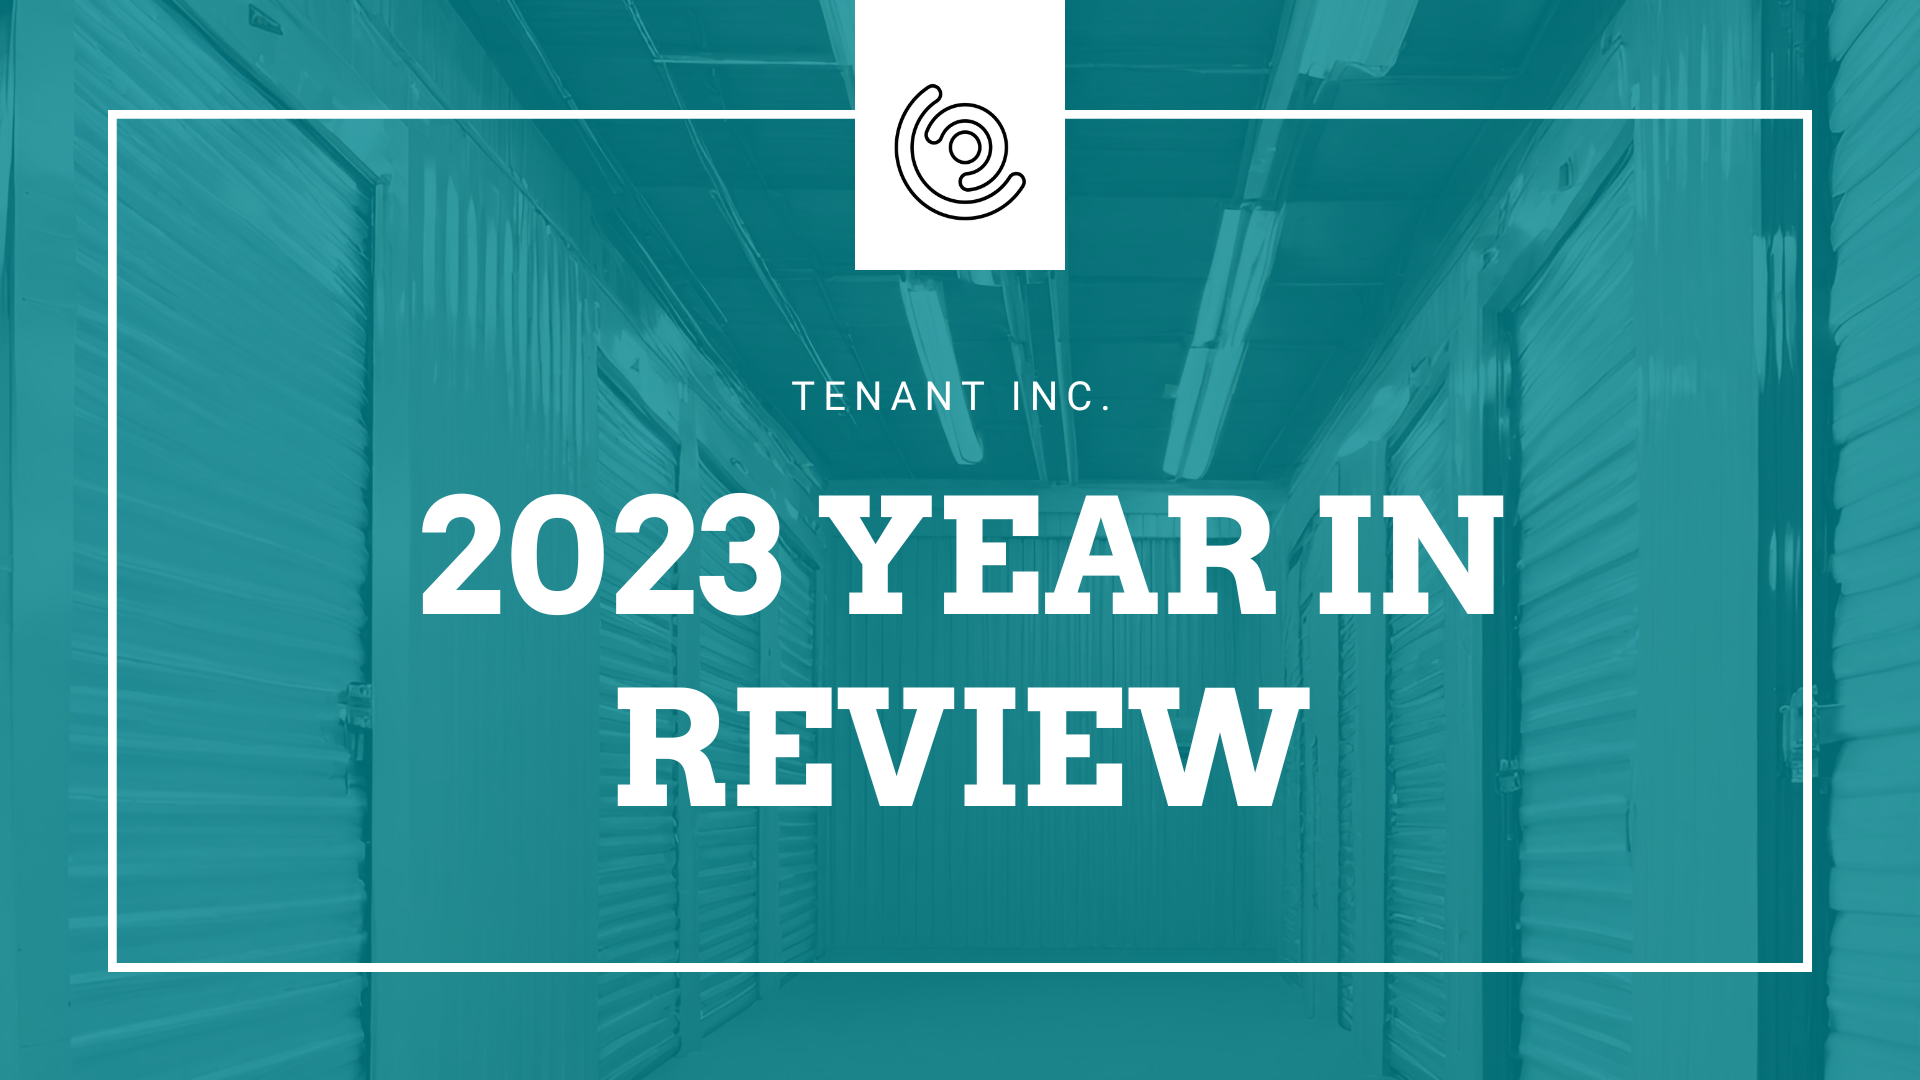 the thumbnail for Tenant Inc.'s 2023 year in review blog